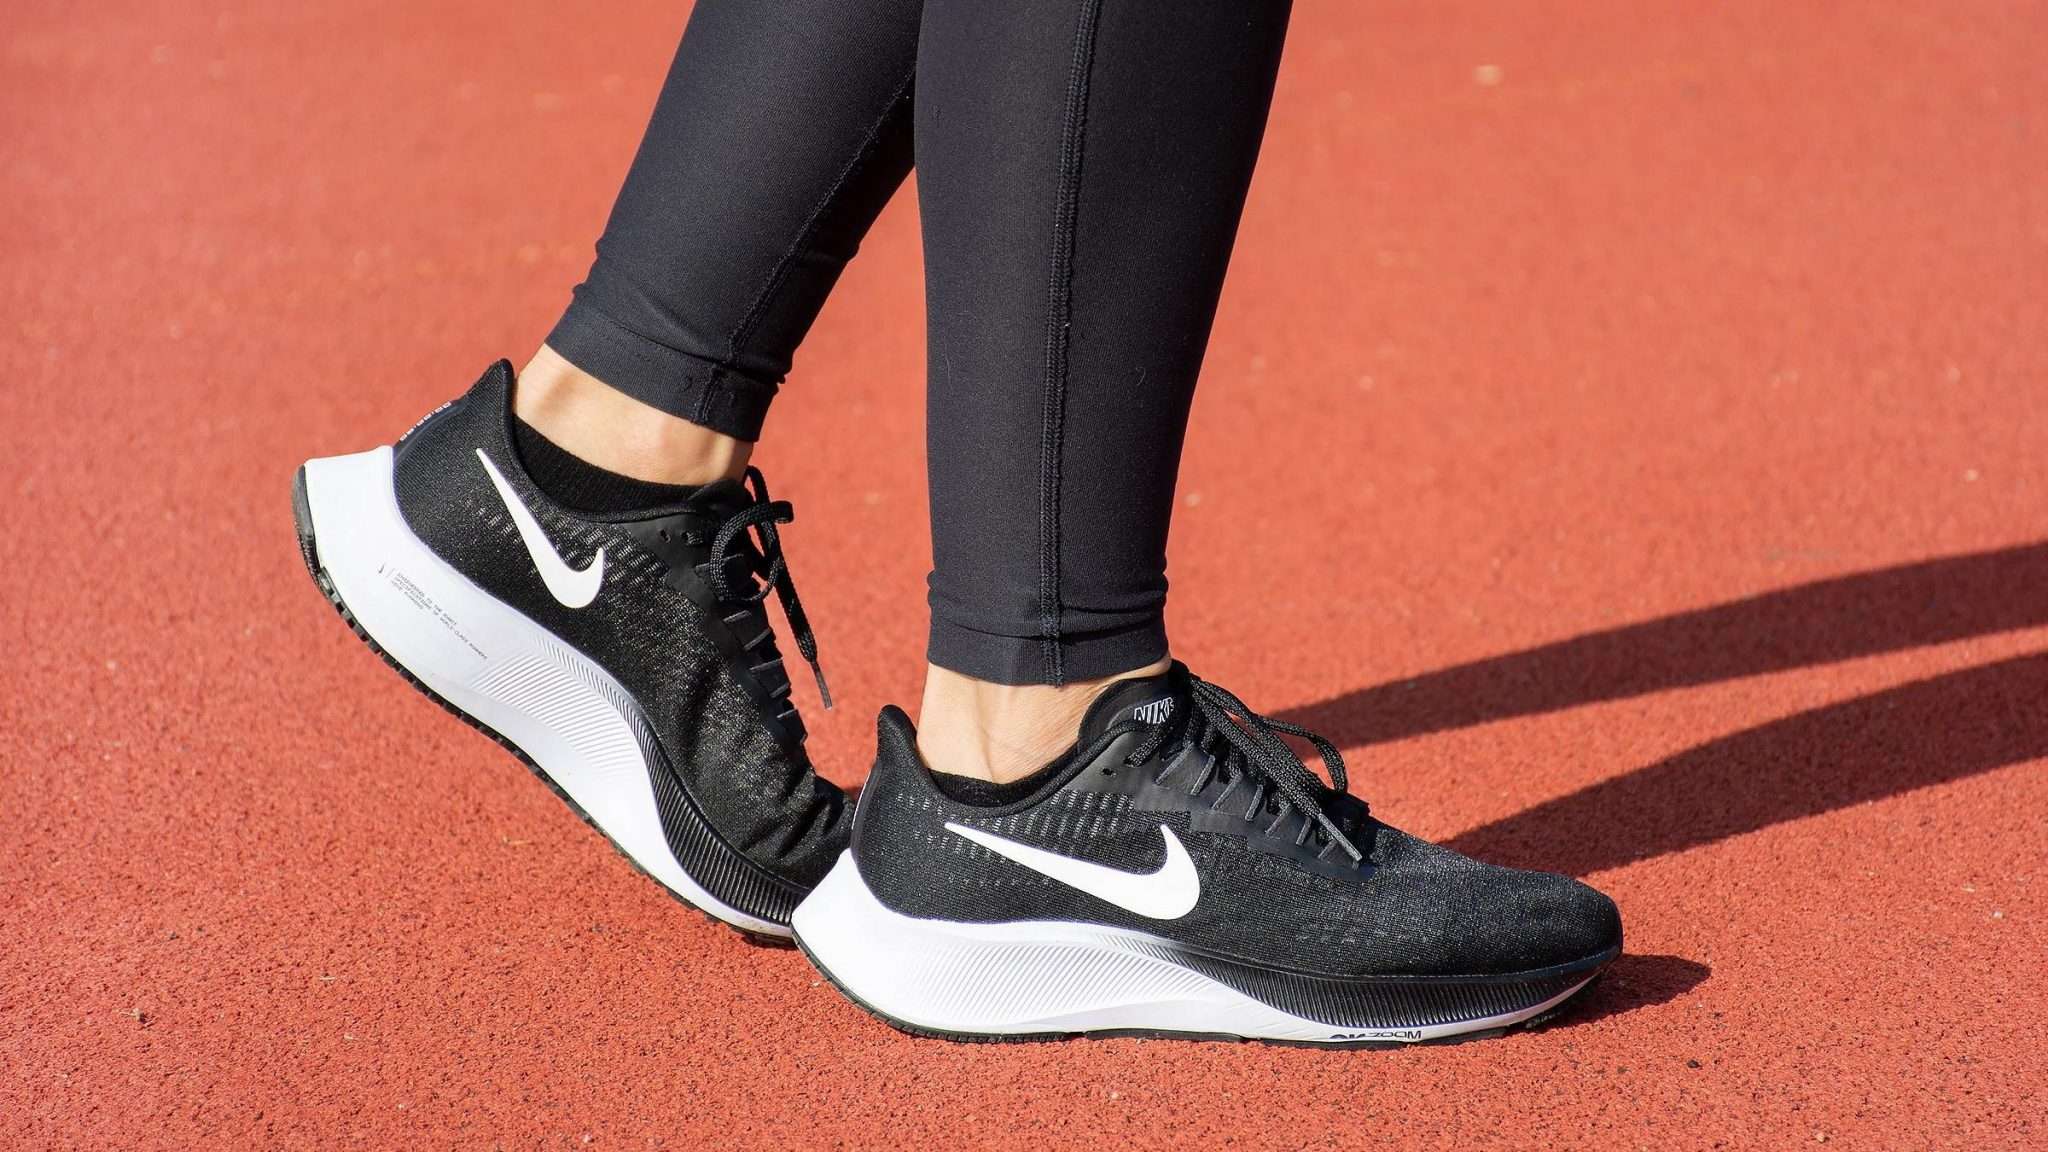 Politie bundel Clan Top 10 Nike sports shoes | Best shoes for the max performances